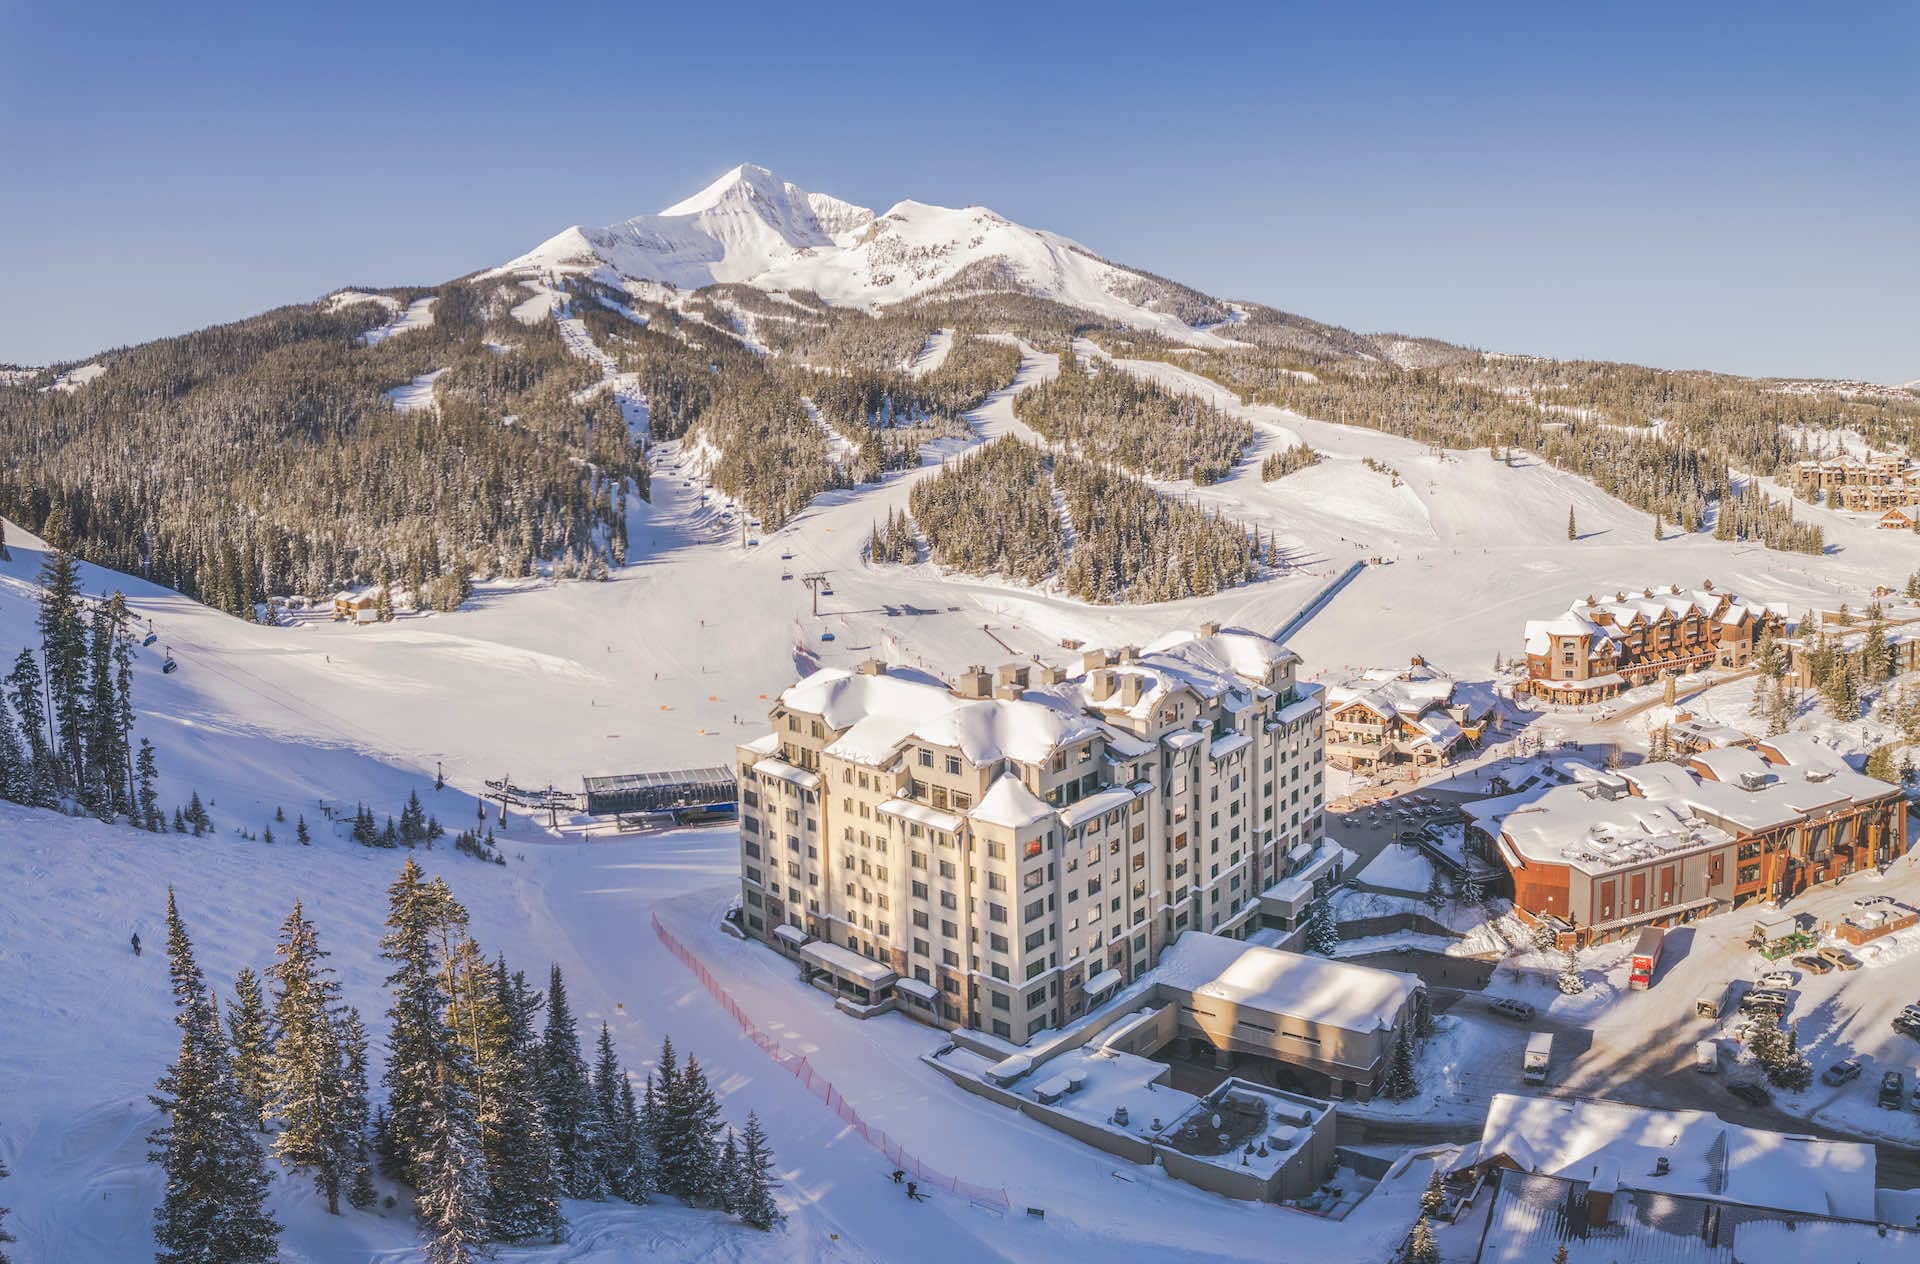 Winter Summit Hotel with Lone Peak in the background